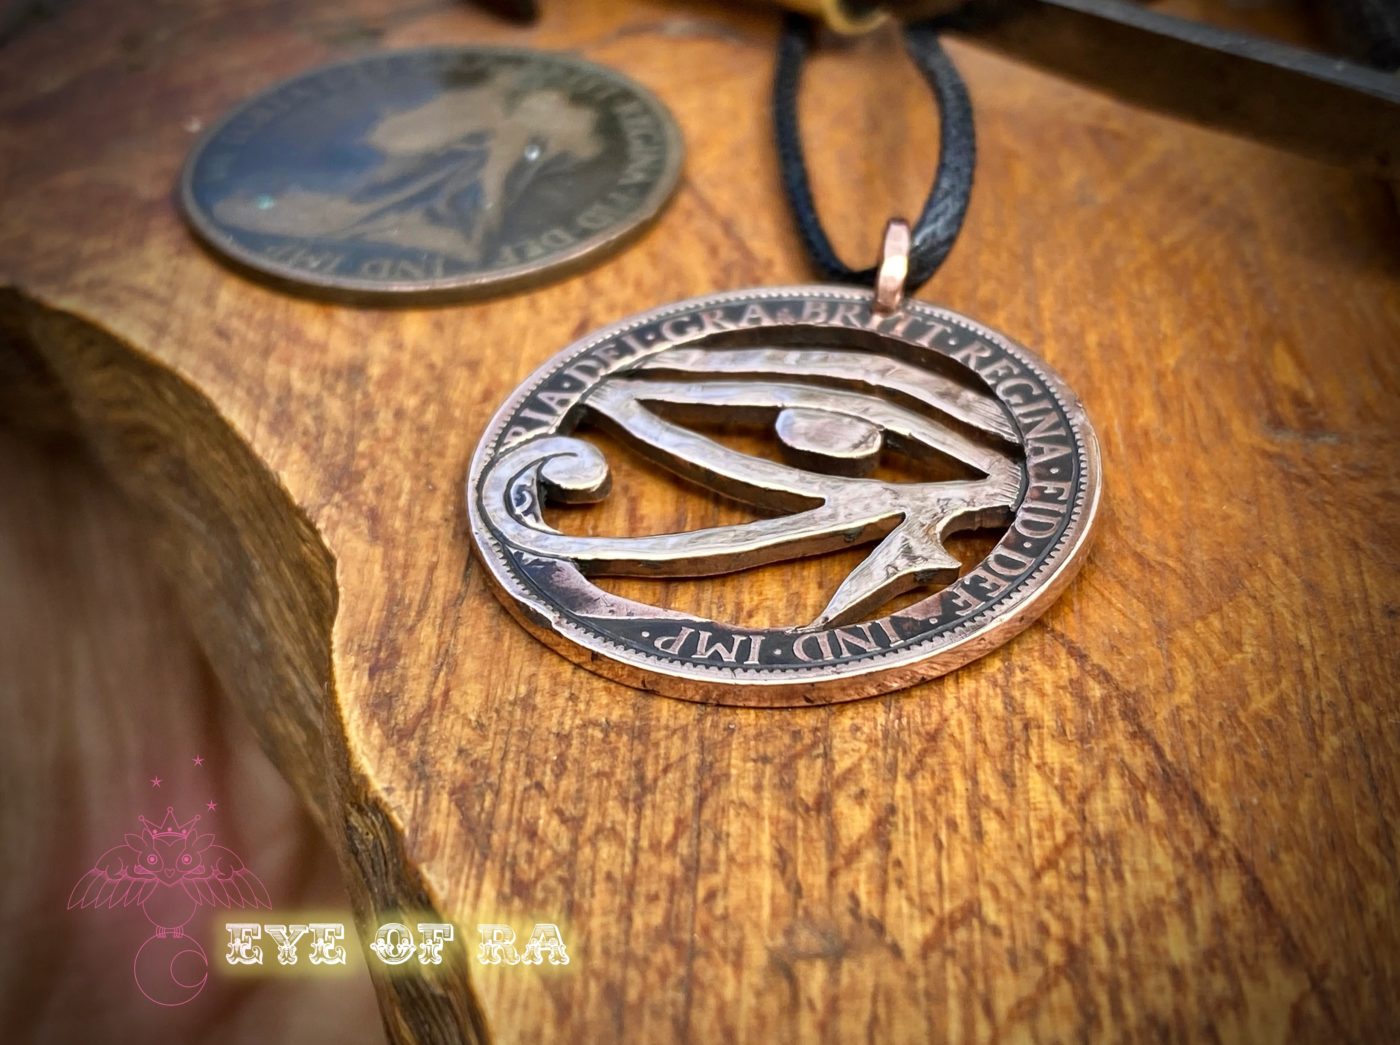 Handcrafted and repurposed coin eye of horus pendant necklace